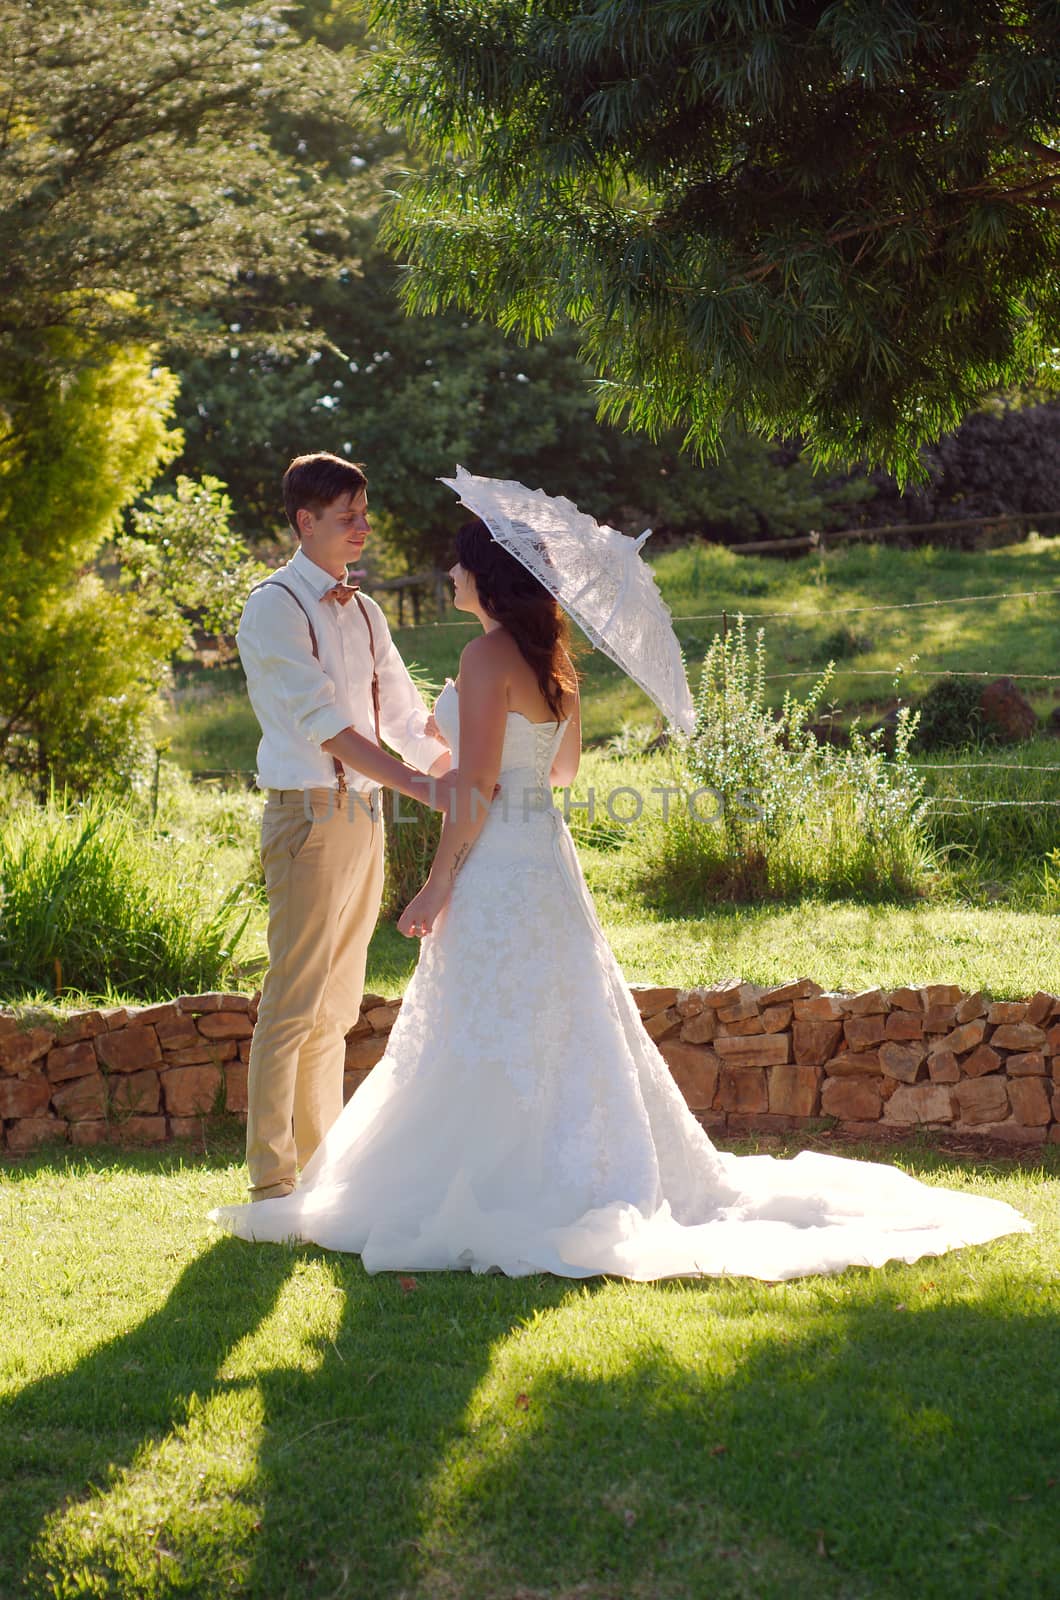 Bride and groom in garden wedding with parasol by alistaircotton